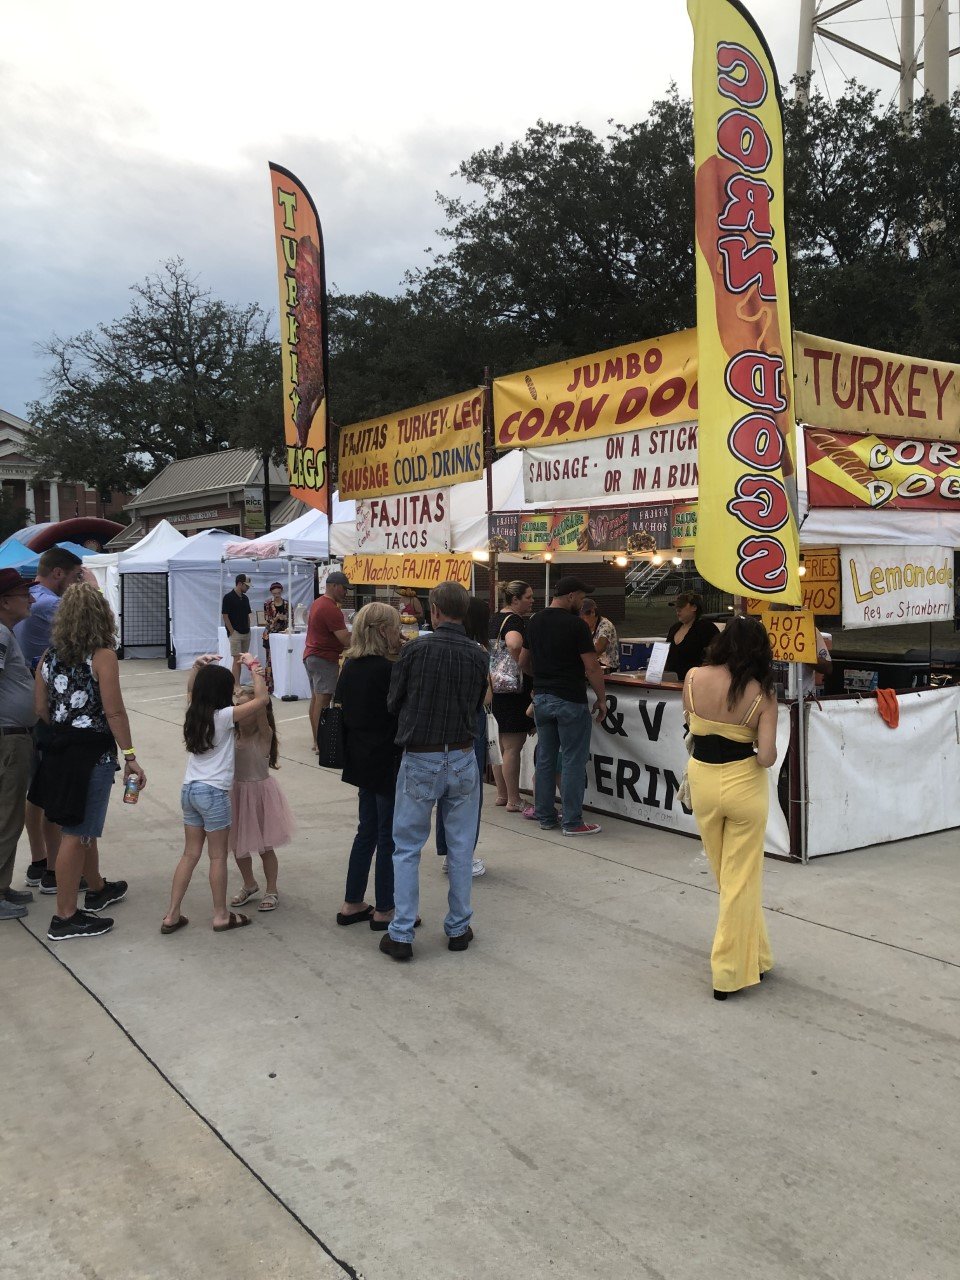 People brought their appetites to the Katy Rice Festival, which had food trucks with various delicacies for people to enjoy.